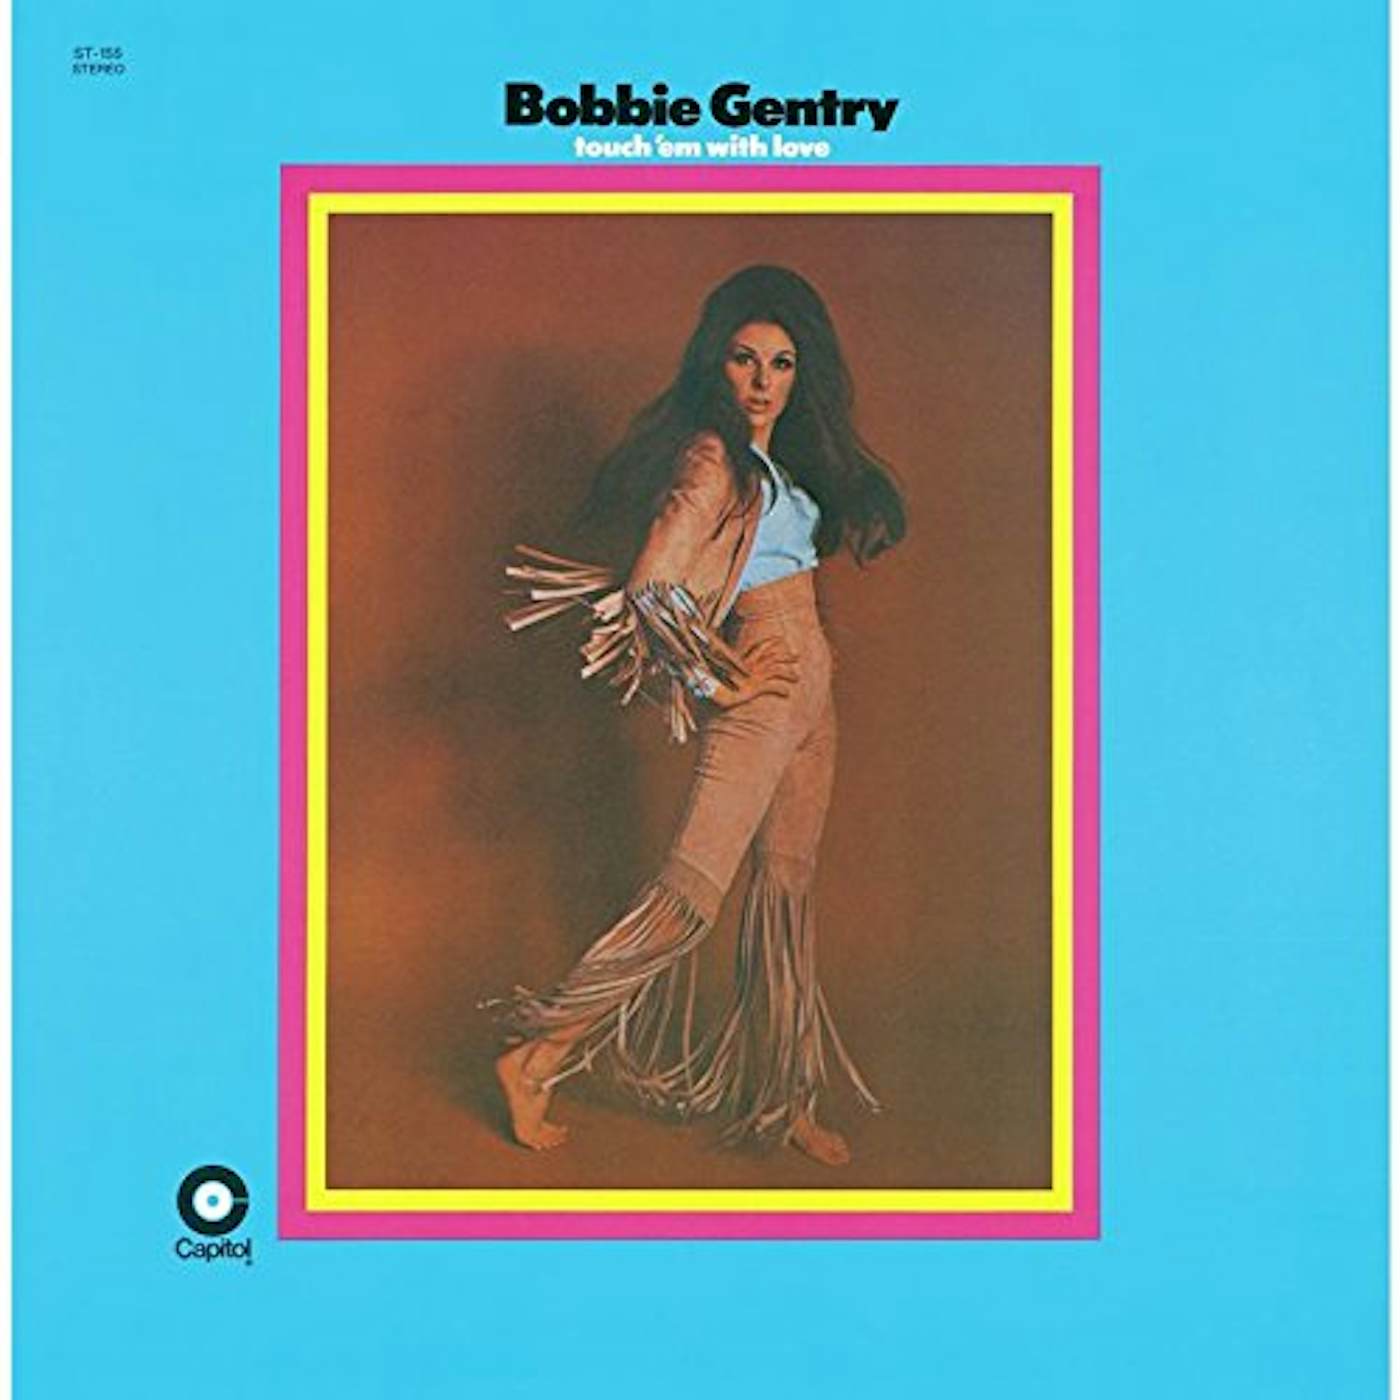 Bobbie Gentry TOUCH EM WITH LOVE CD